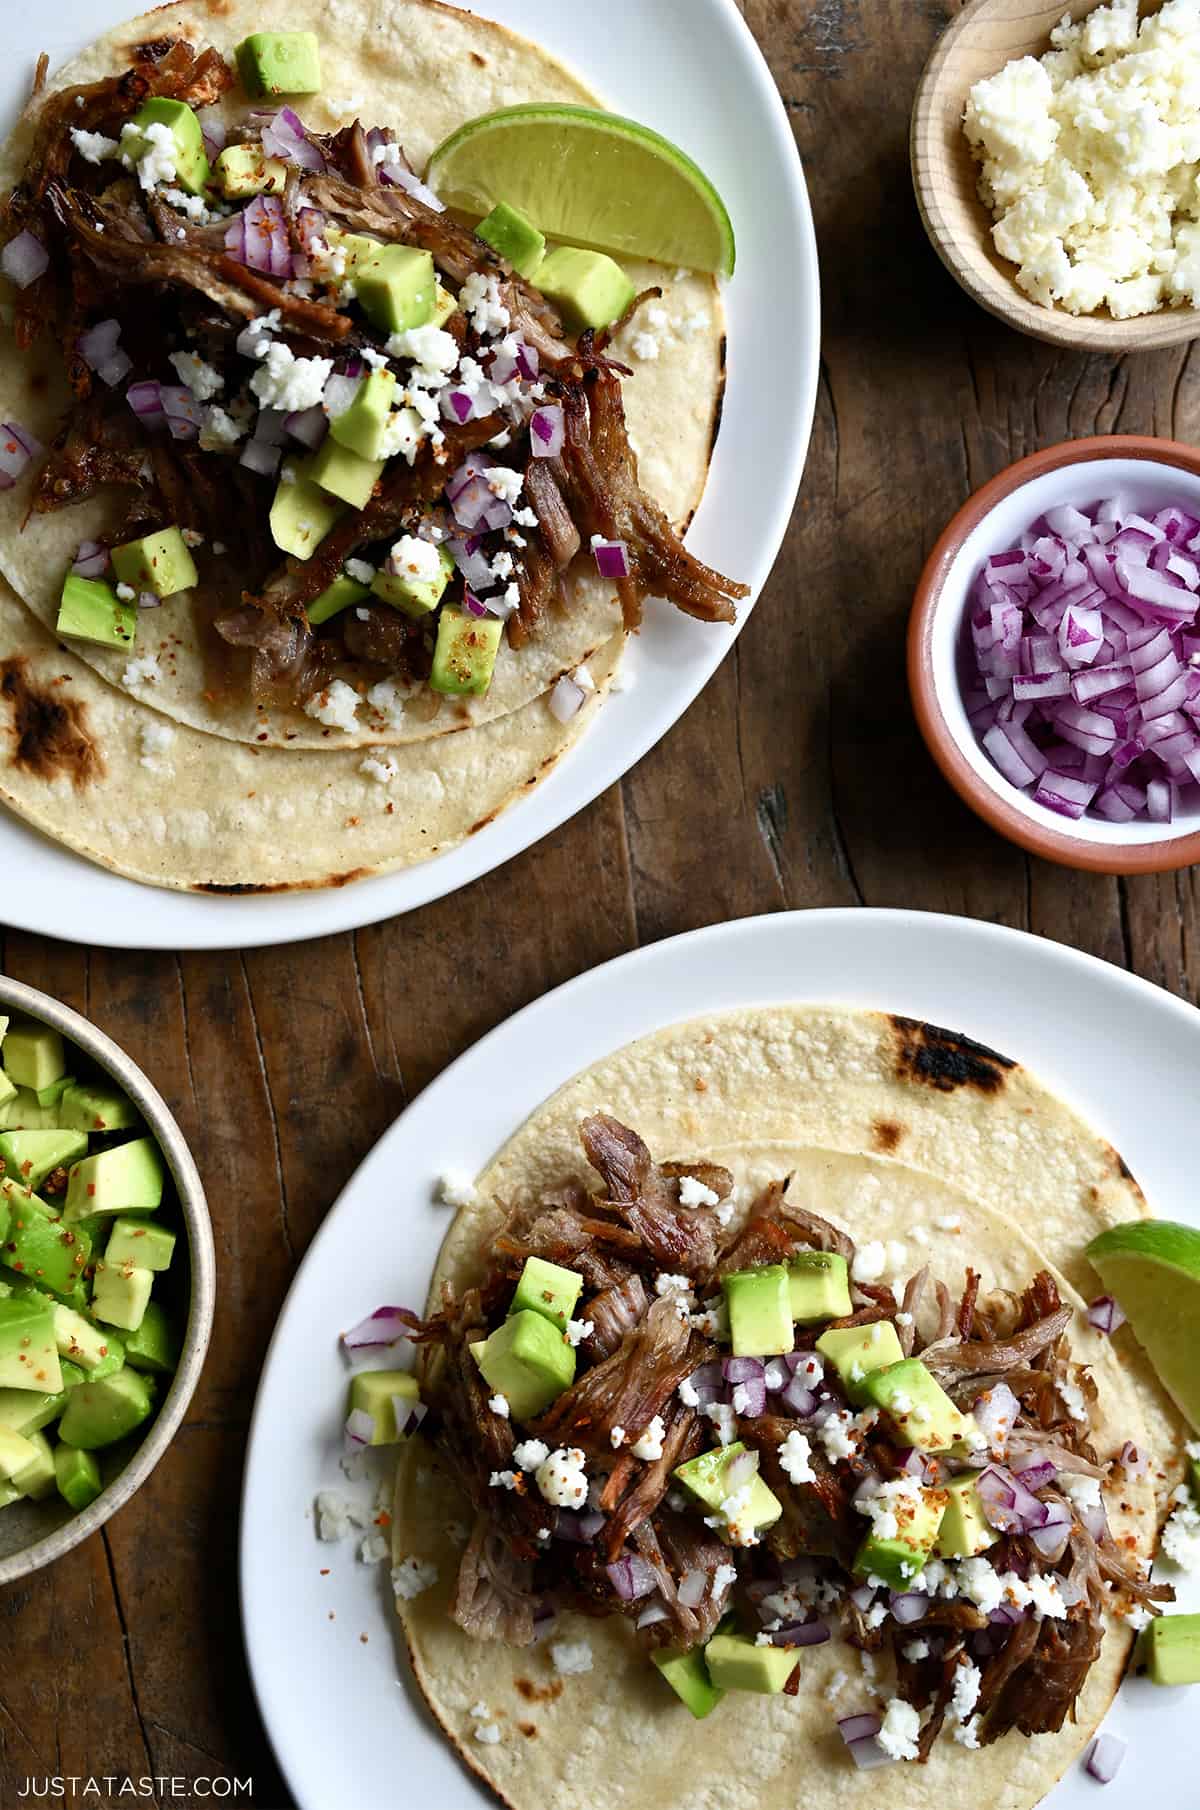 Two pulled pork tacos on separate plates. The tacos are topped with cubed avocado, crumbled cotija cheese and diced red onion. Small bowls with more toppings are beside the tacos.